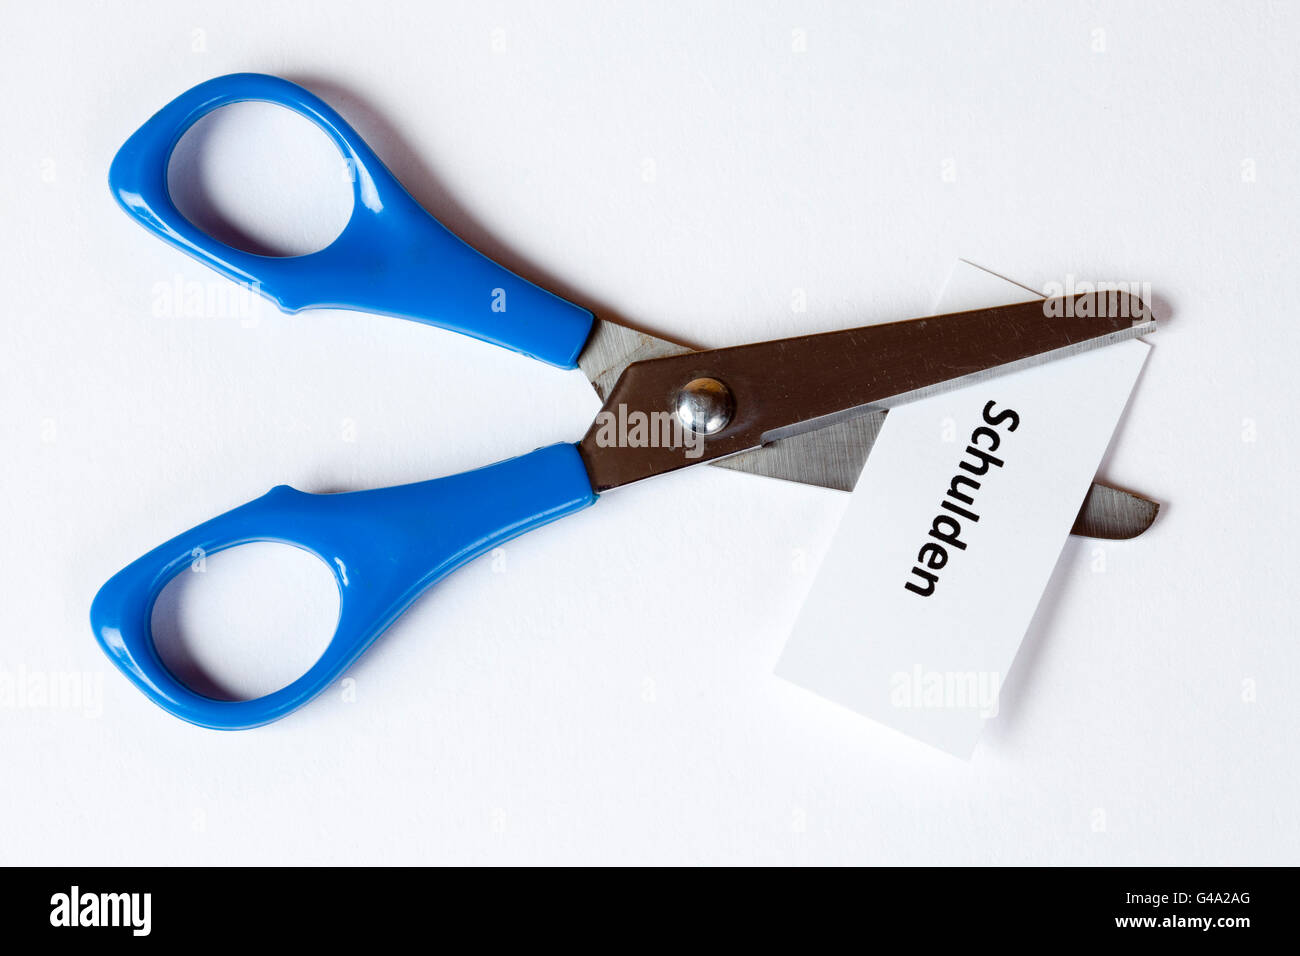 Scissors with the sign 'Schulden', German for 'debts', symbolic image for cutting debt Stock Photo